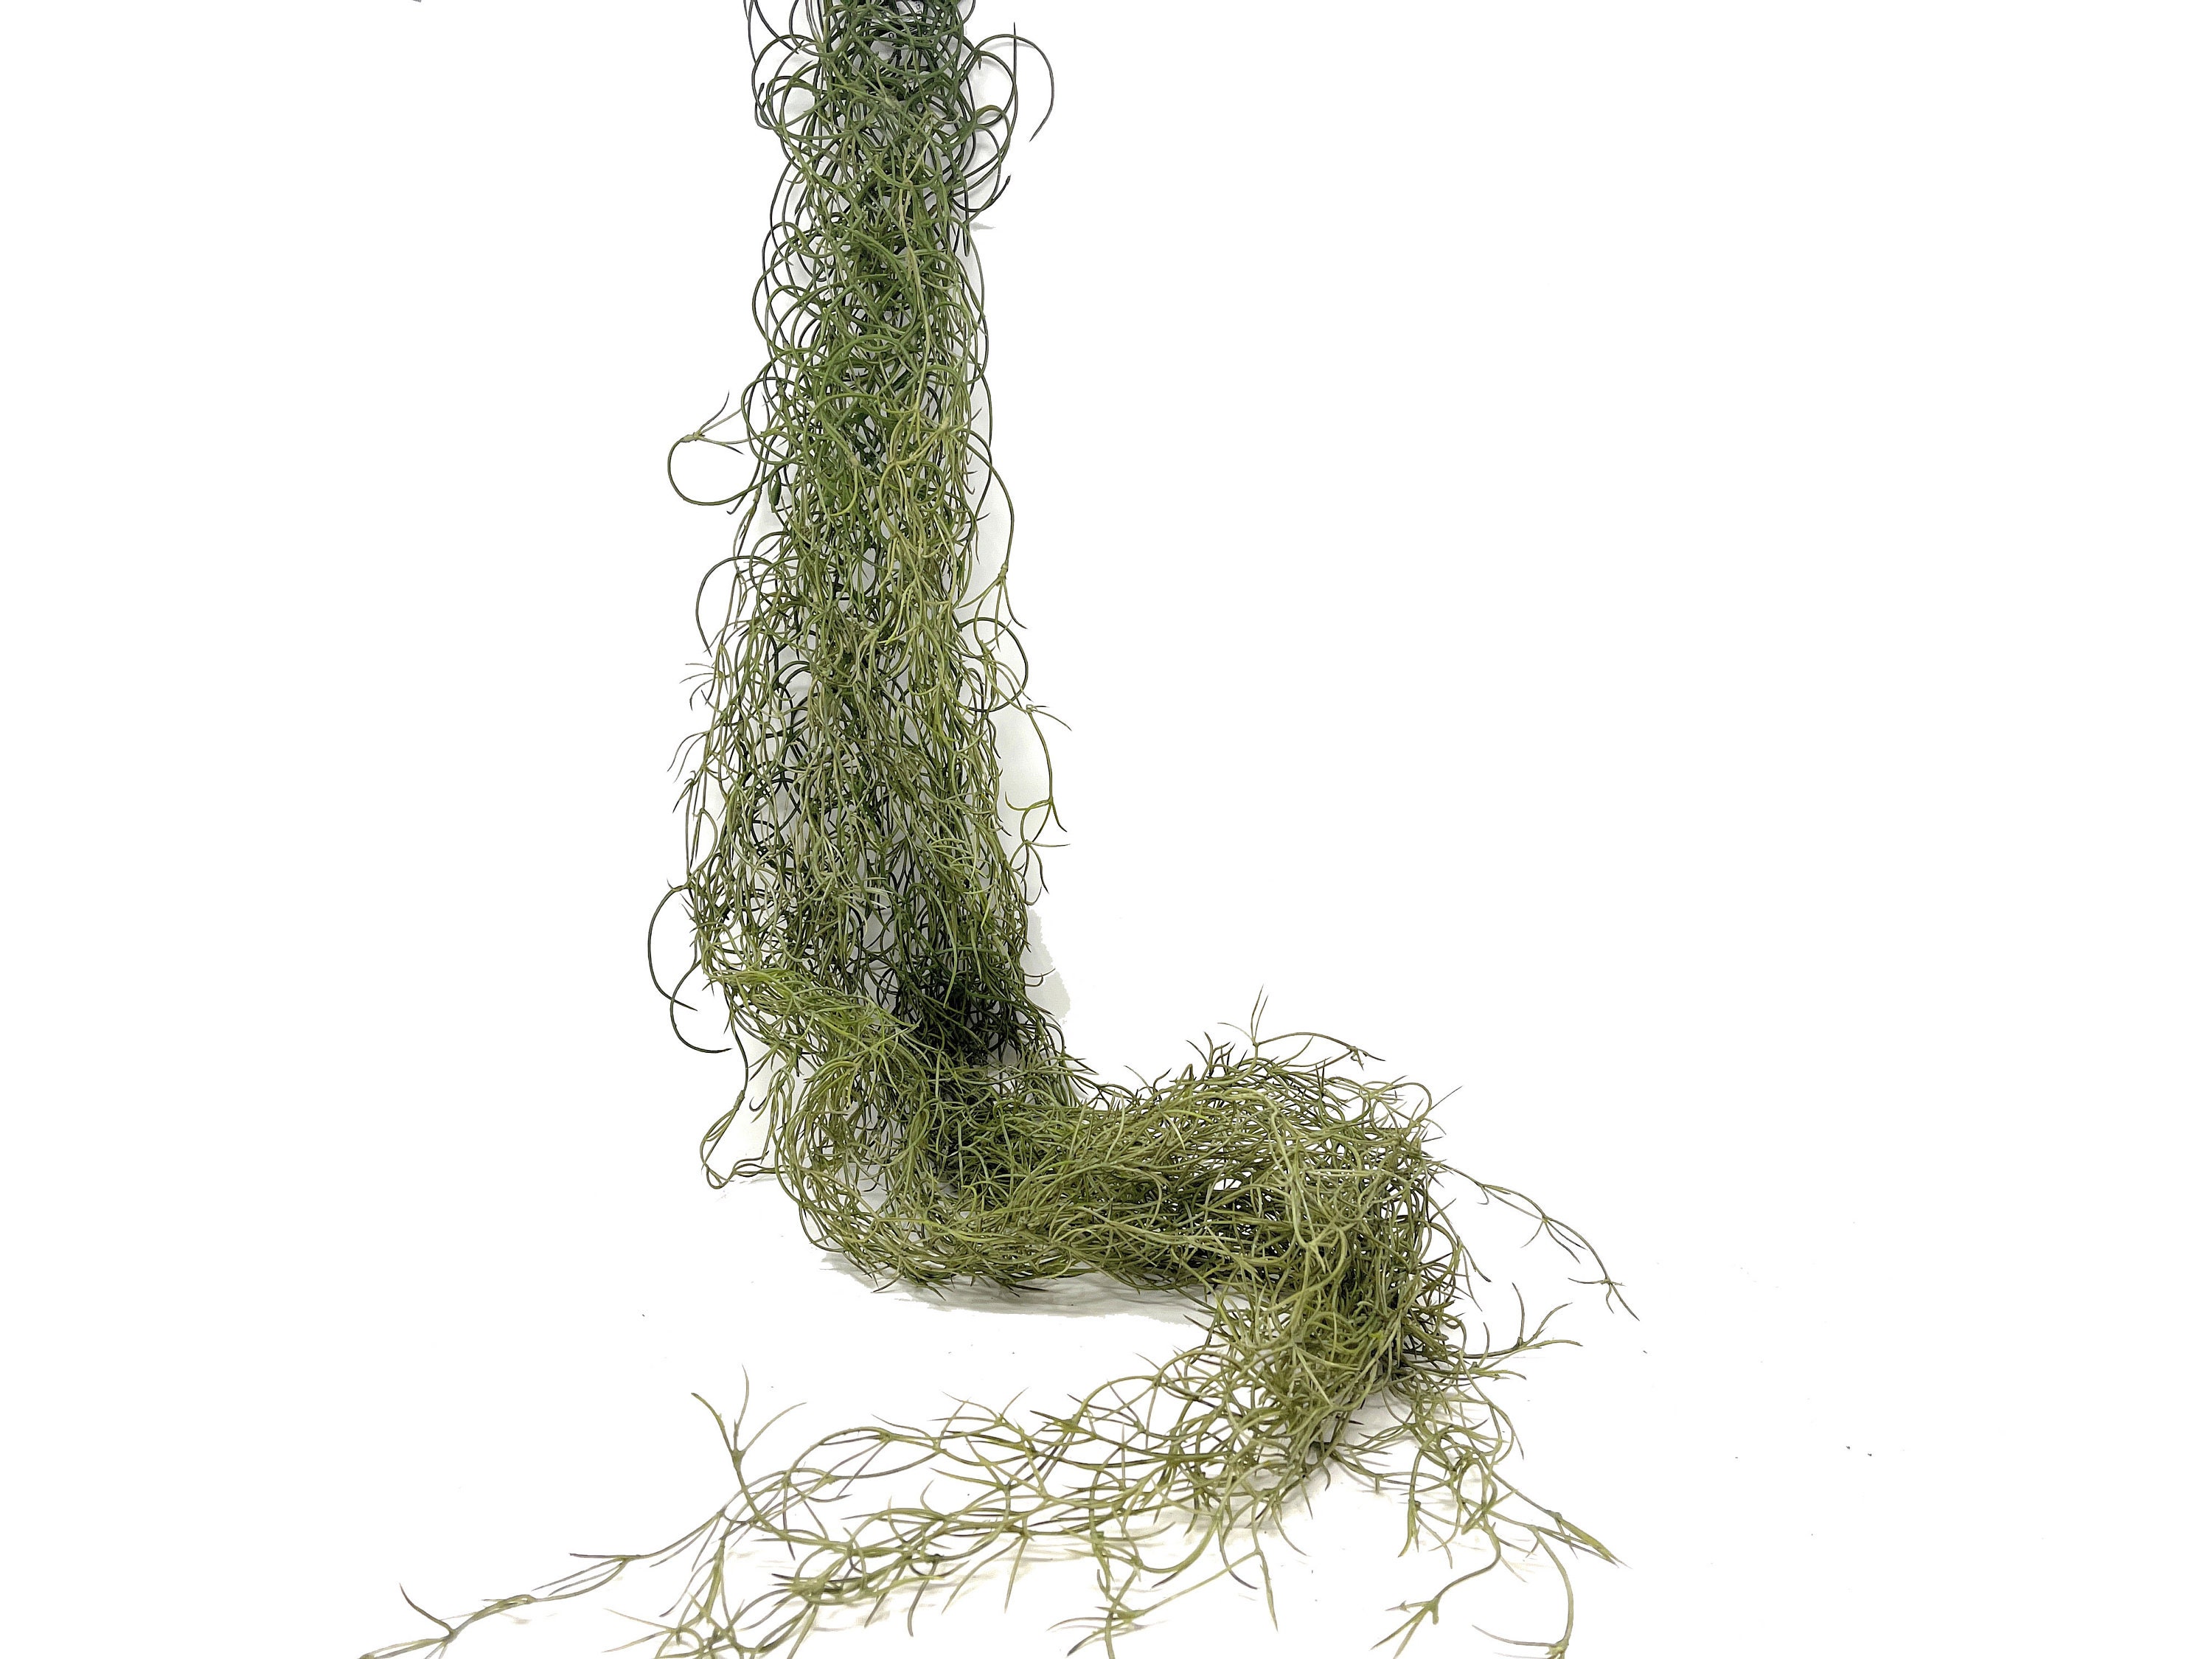 SEEKO Spanish Moss, Fake Moss for Artificial Hanging Plants & Moss for  Plants - (Variety 6pck, 33 & 20''Long) - Moss Décor Hanging Vines -  Succulent